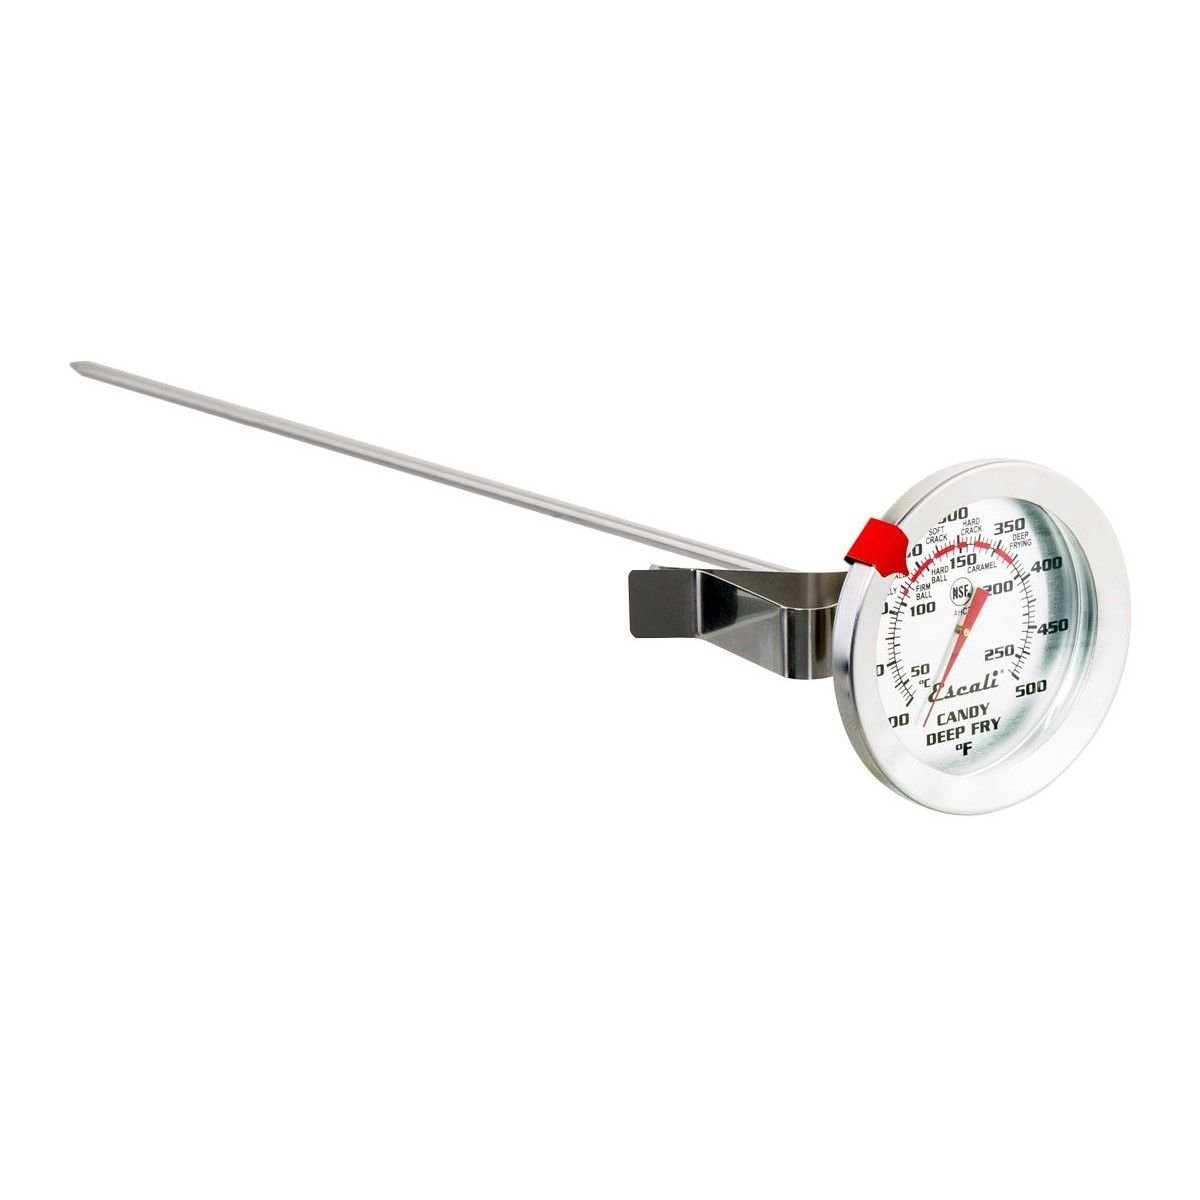 Best deep-fry thermometer